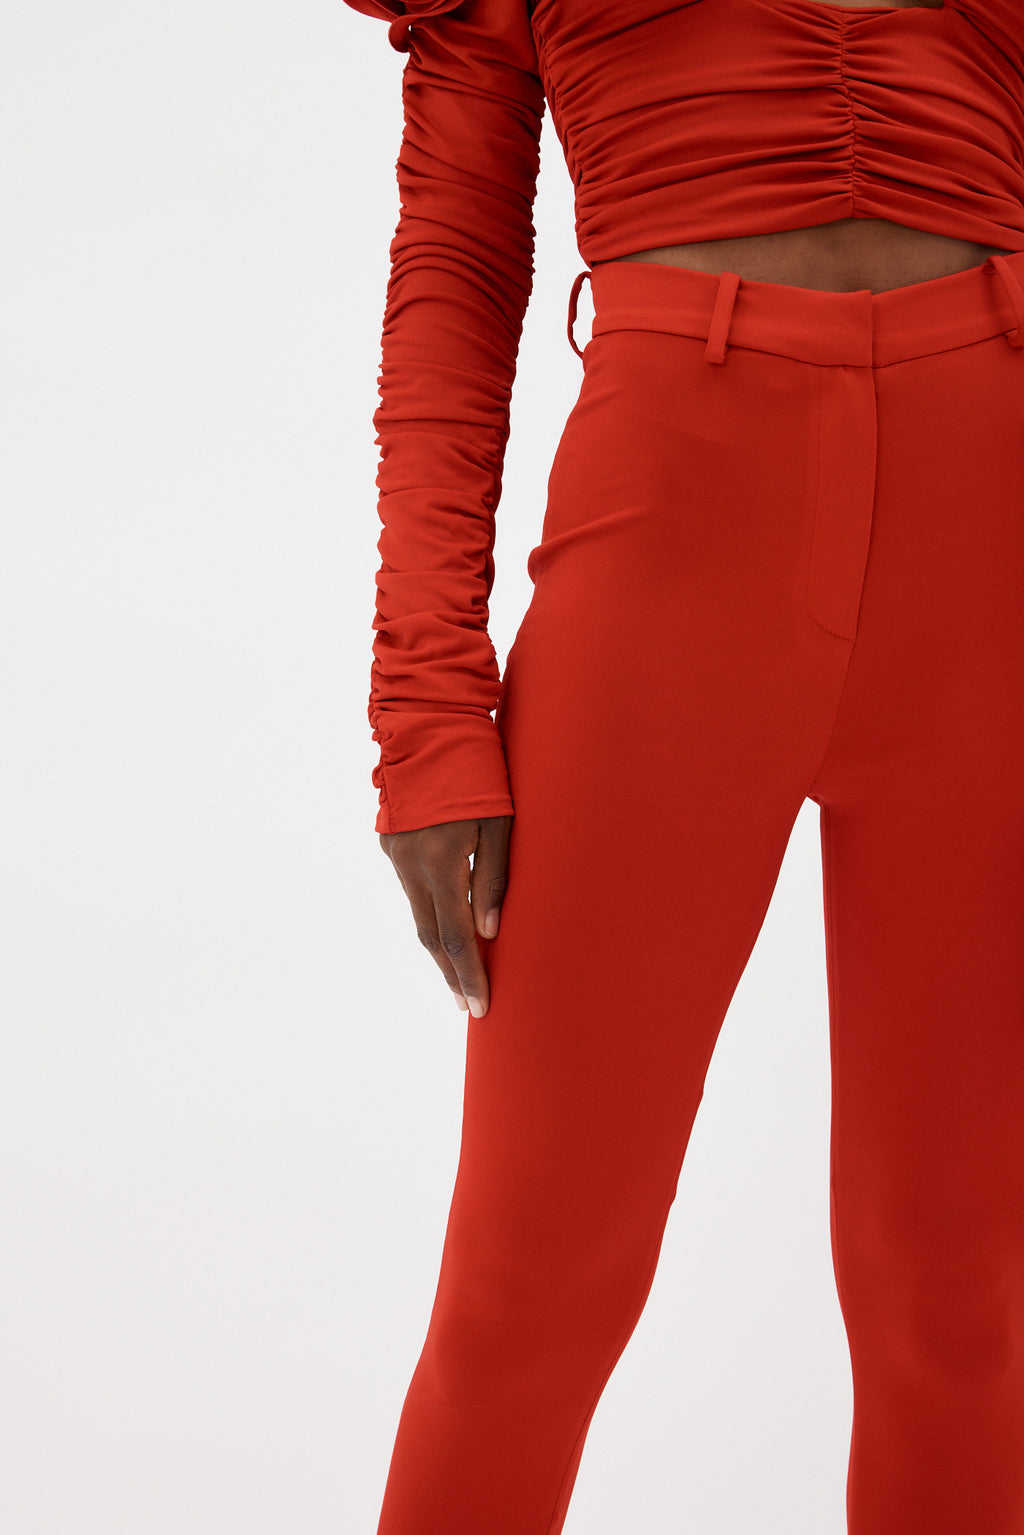 Red Skinny Tailored Trousers  Hionidis Mankind